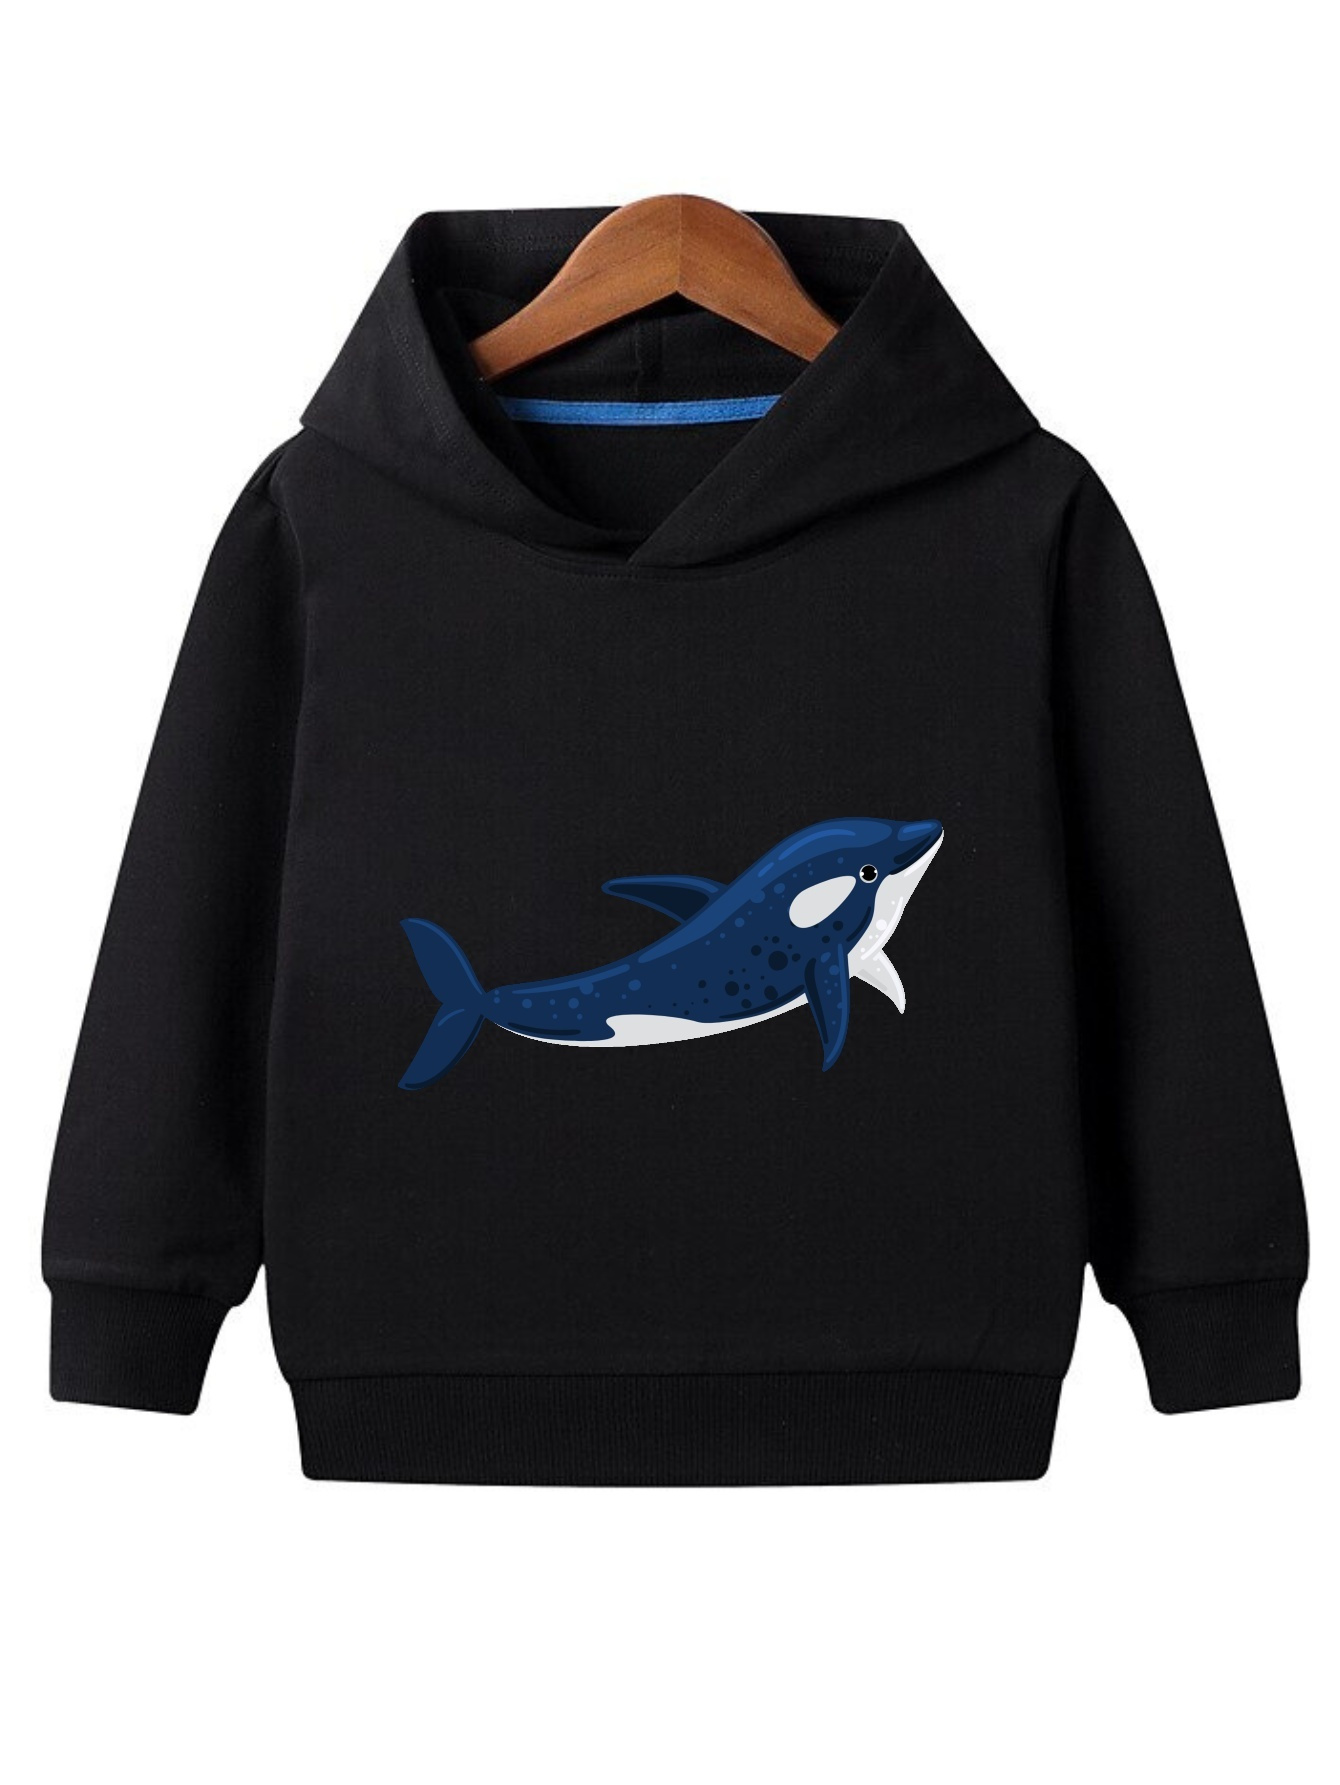 Trendy Sea And Dolphin 3D Print Boys Casual Pullover Long Sleeve Hoodies,  Boys Sweatshirt For Spring Fall, Kids Hoodie Tops Outdoor